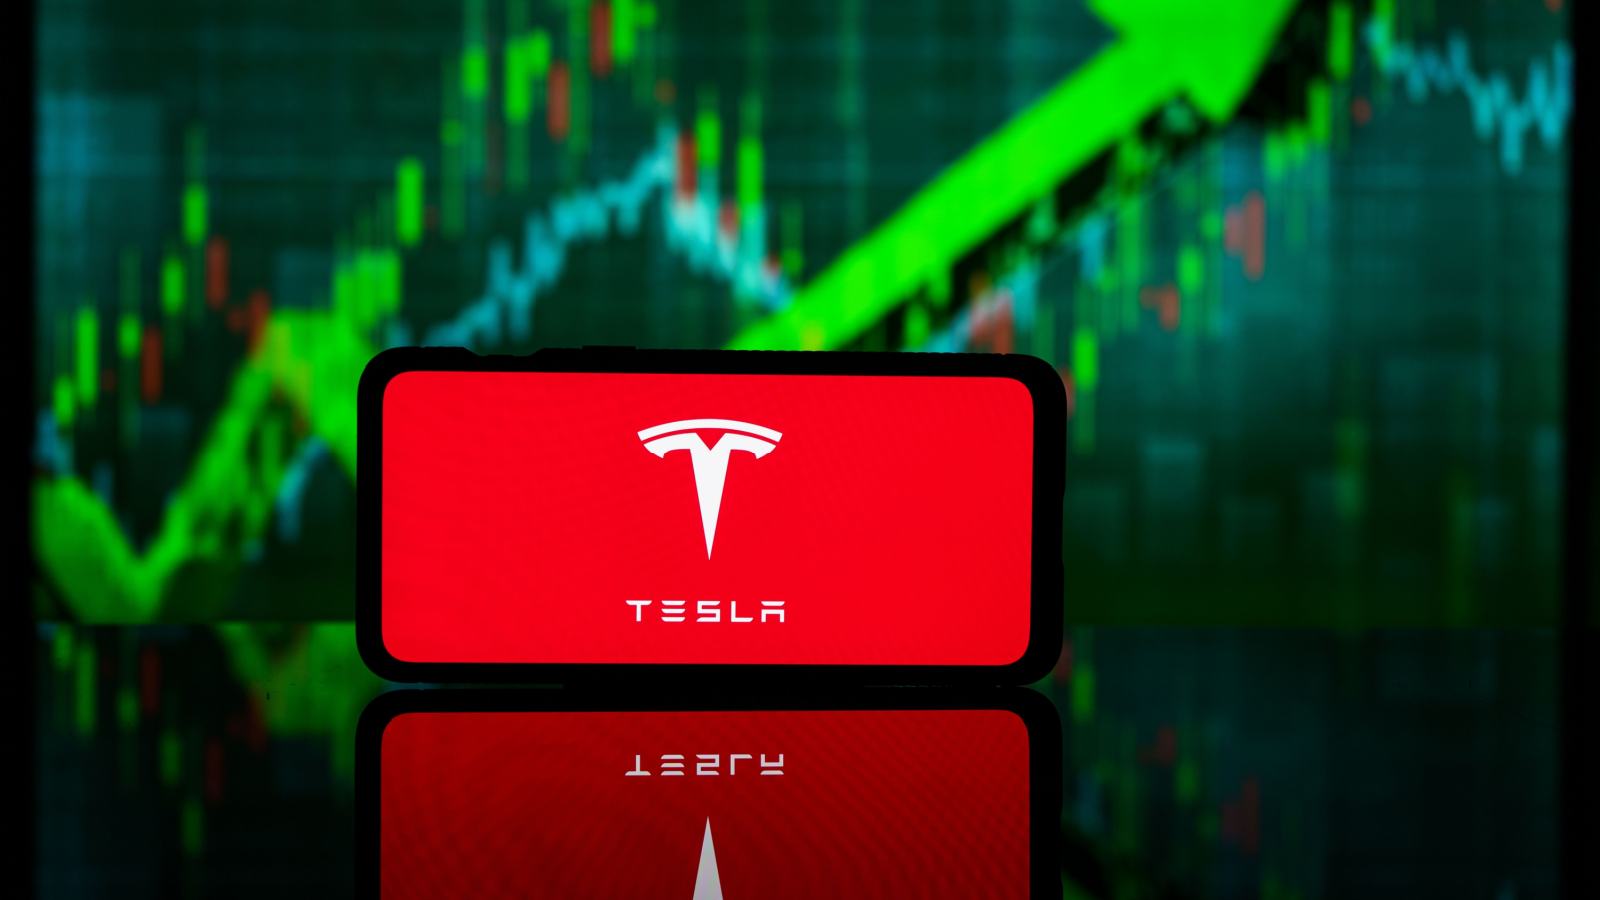 Welcome Unpleasant Tesla News as an Opportunity to Buy TSLA Stock on the Dip